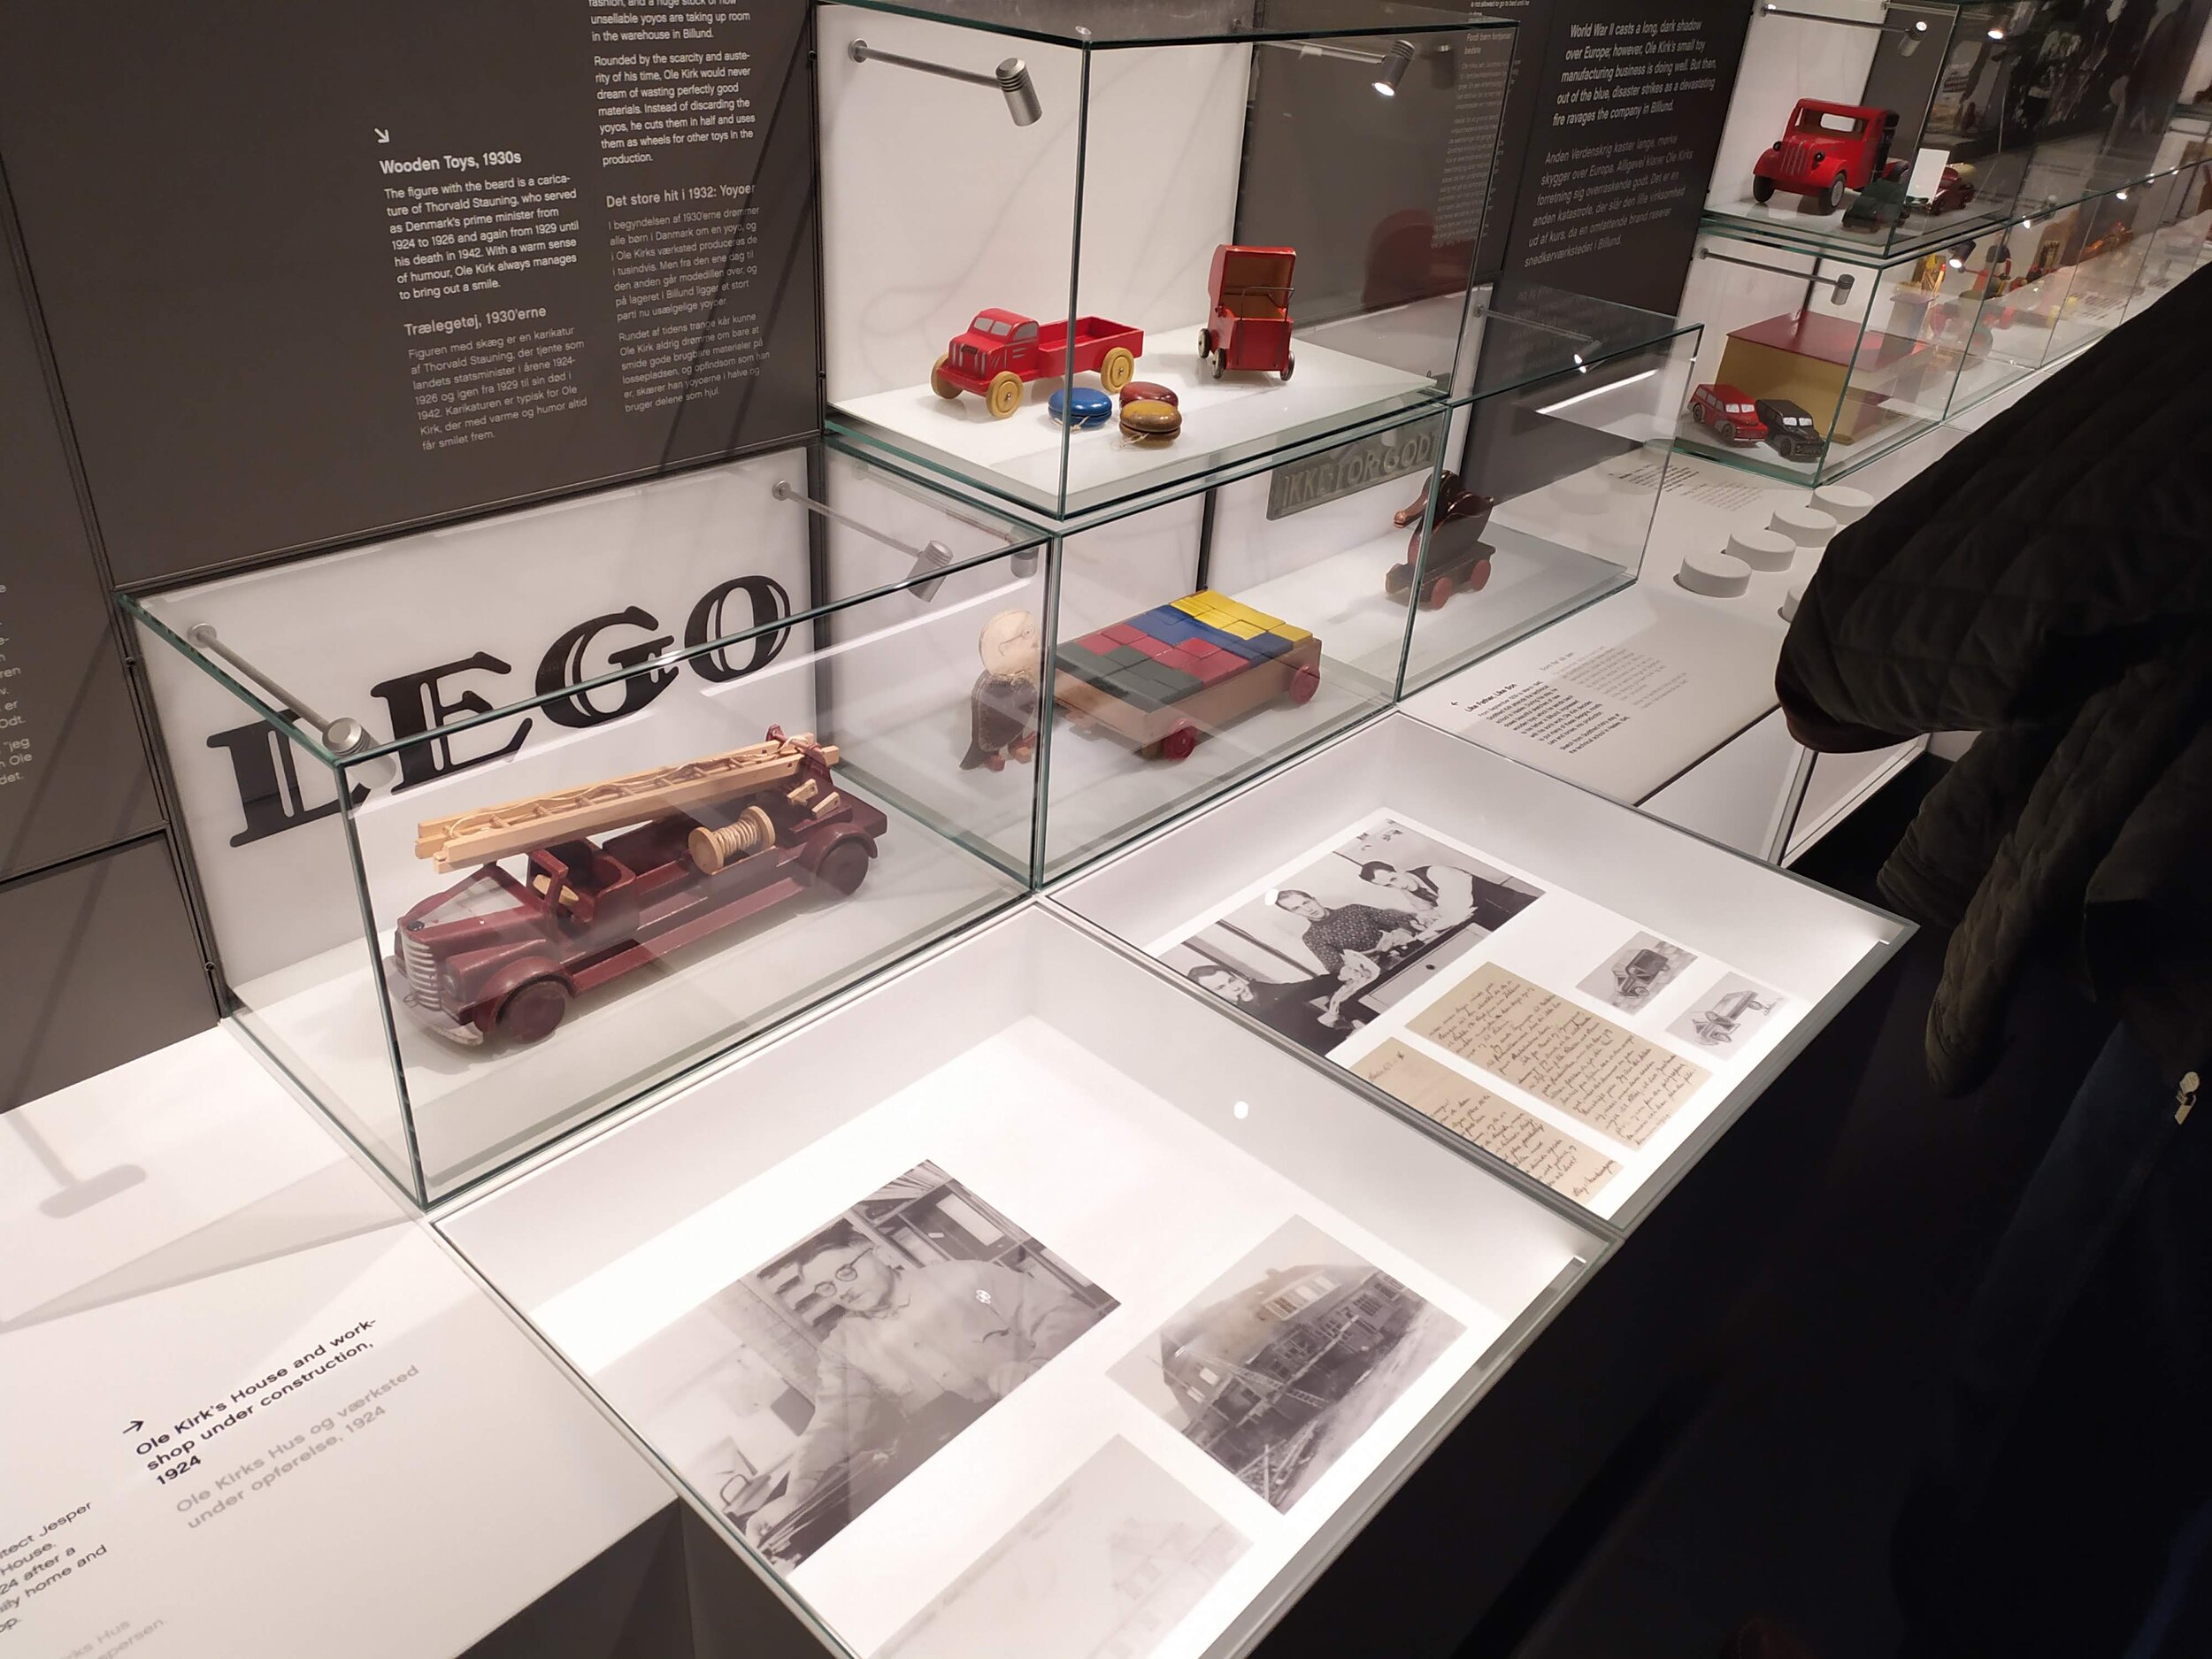 vulgaritet Ren og skær fattigdom Everything You Need to Know About the History Collection Tours at LEGO  House - BrickNerd - All things LEGO and the LEGO fan community